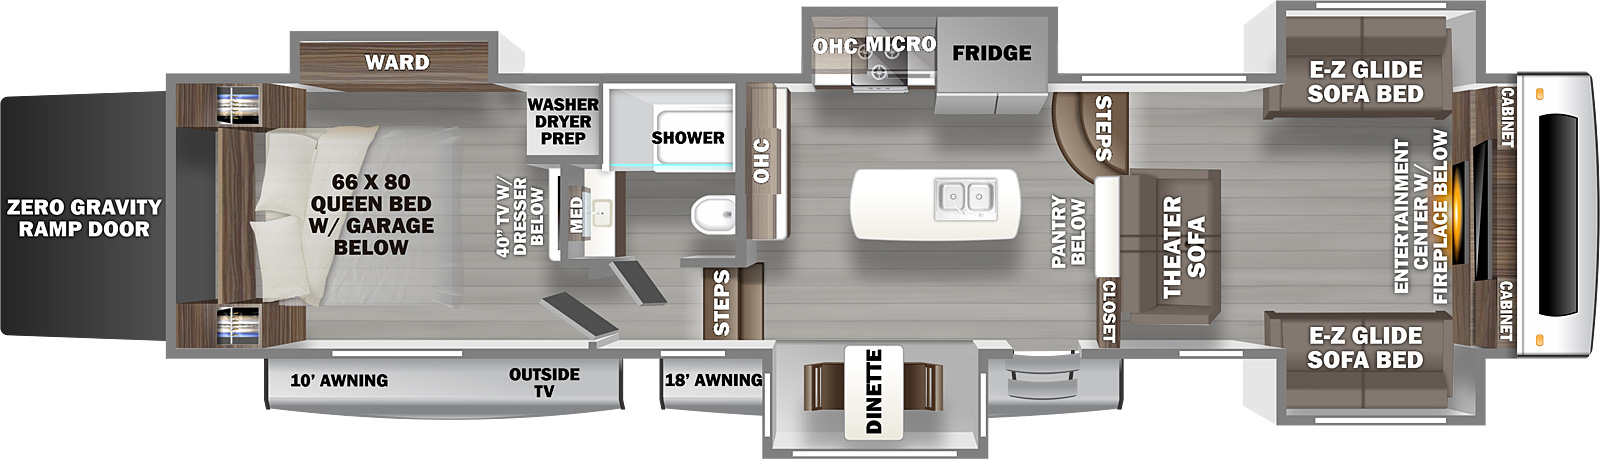 RIVERSTONE 37FLTH floorplan. The 37FLTH has 6 slide outs and one entry door.